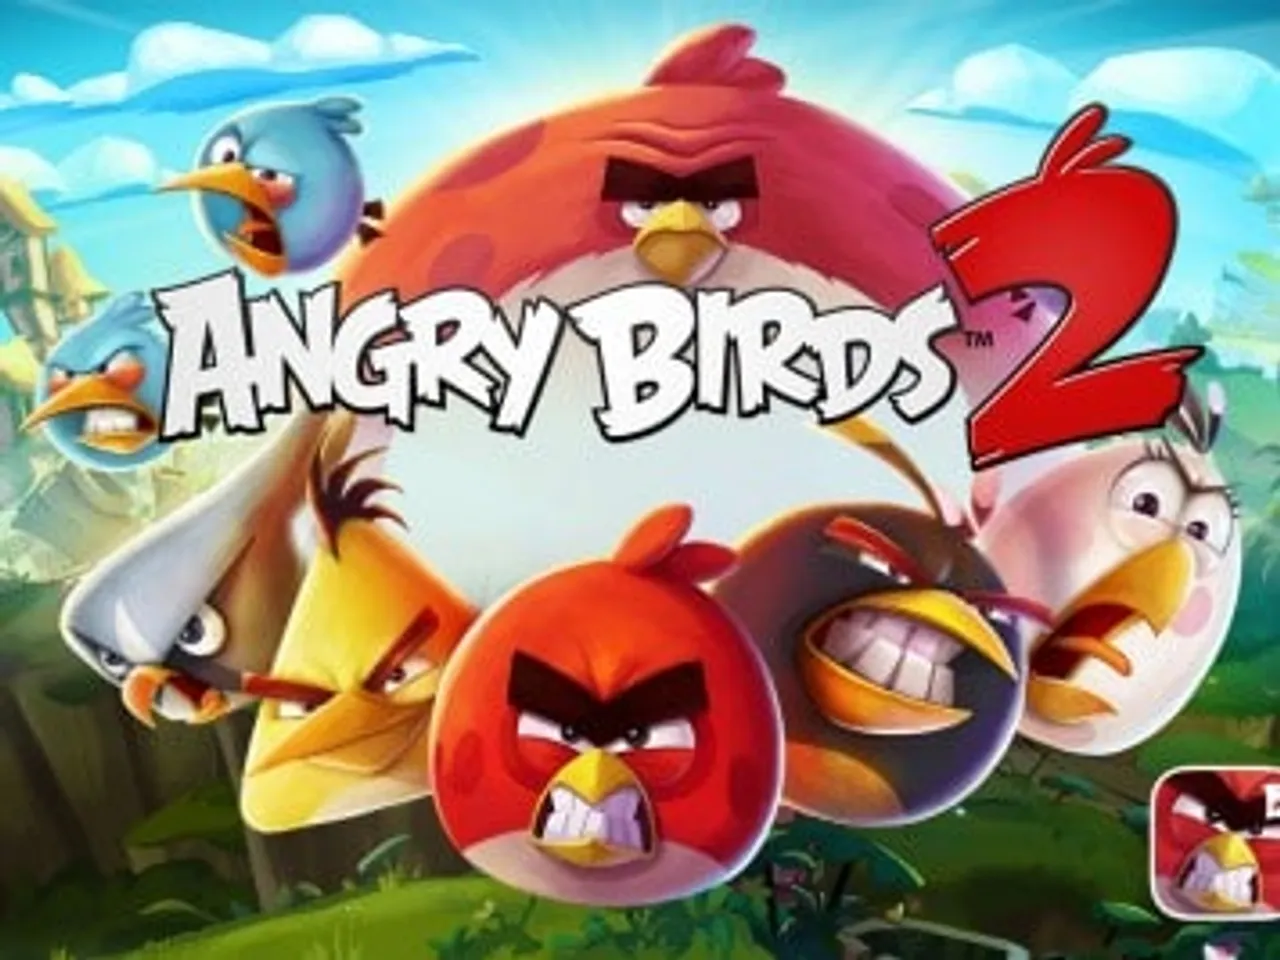 Finally Angry Birds has a sequel; Angry Birds 2 arrives